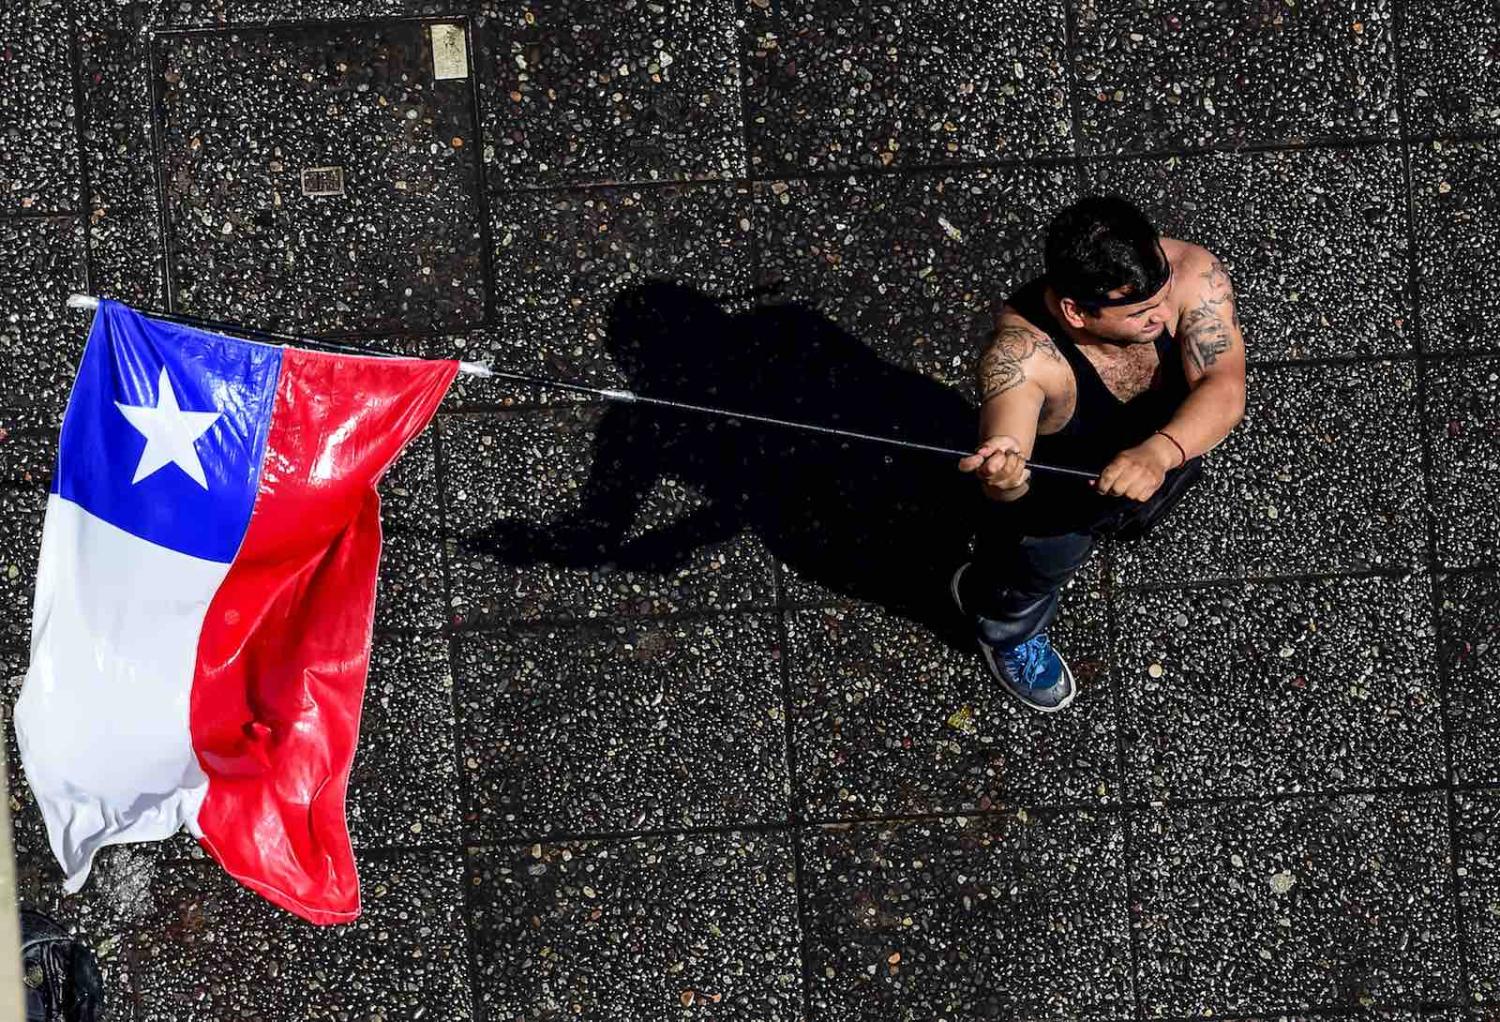 A demonstrator waves the Chilean national flag during a protest in Santiago, 20 October 2019 (Photo: Martin Bernetti/AFP/Getty)